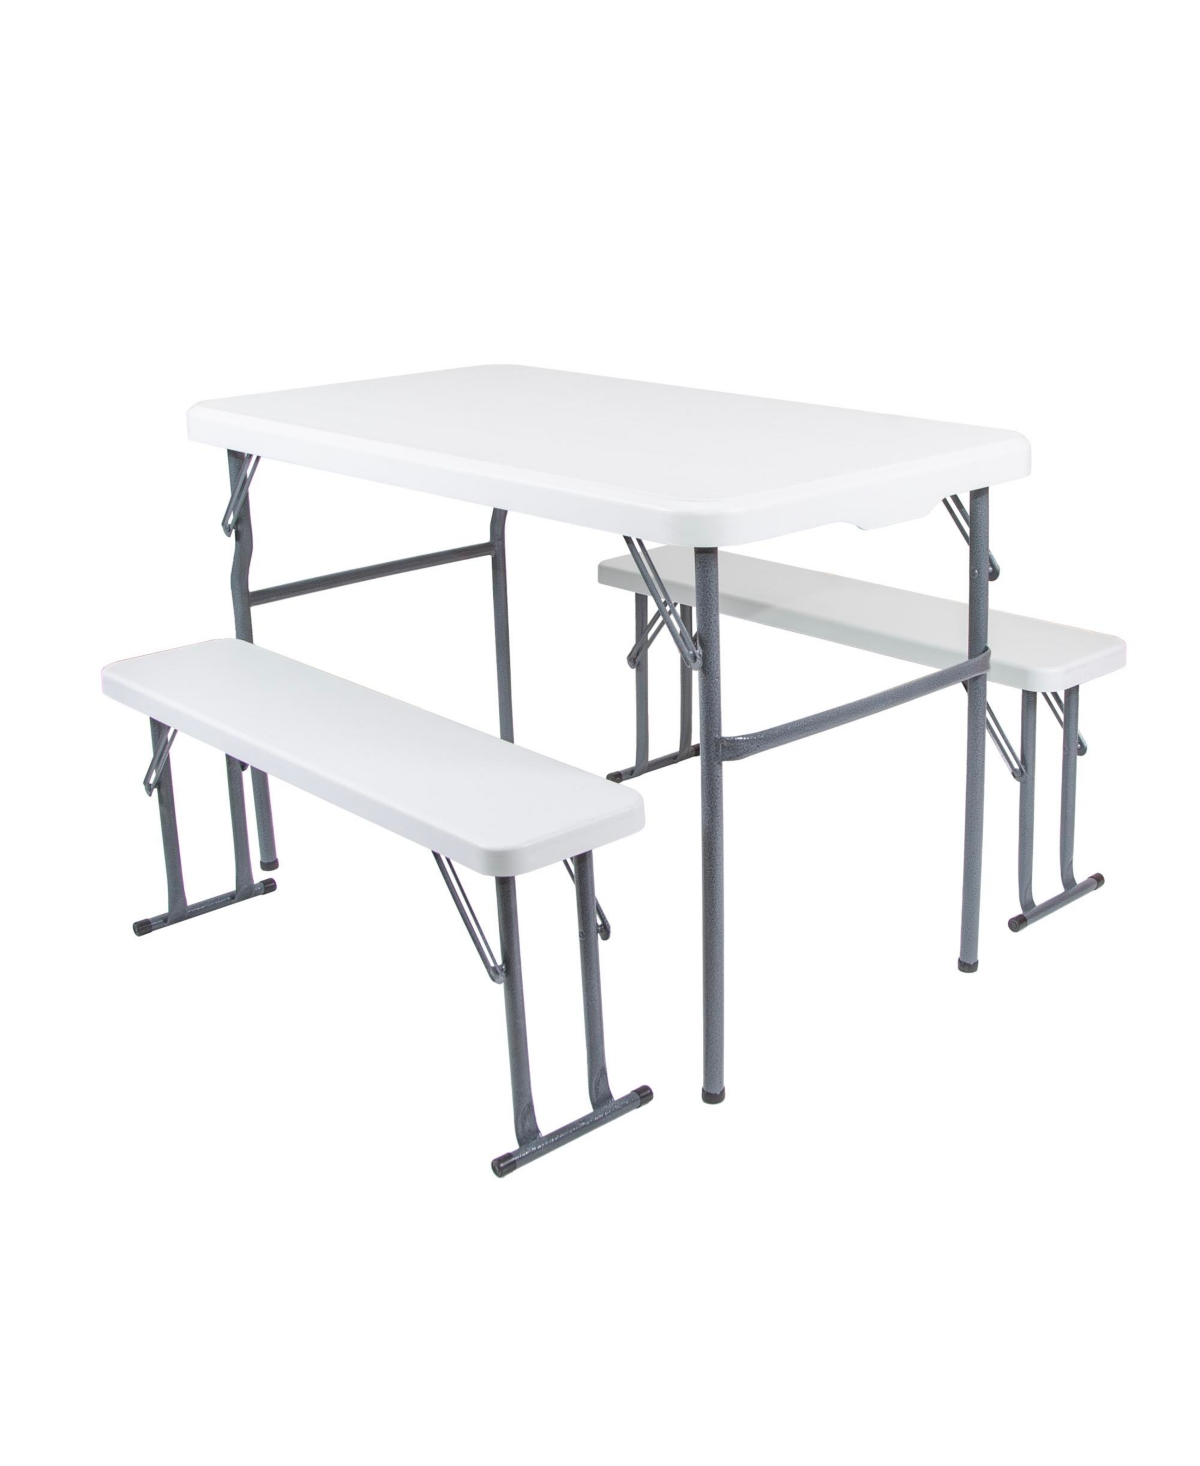 Stan sport Heavy-Duty Camp Table with Benches - White